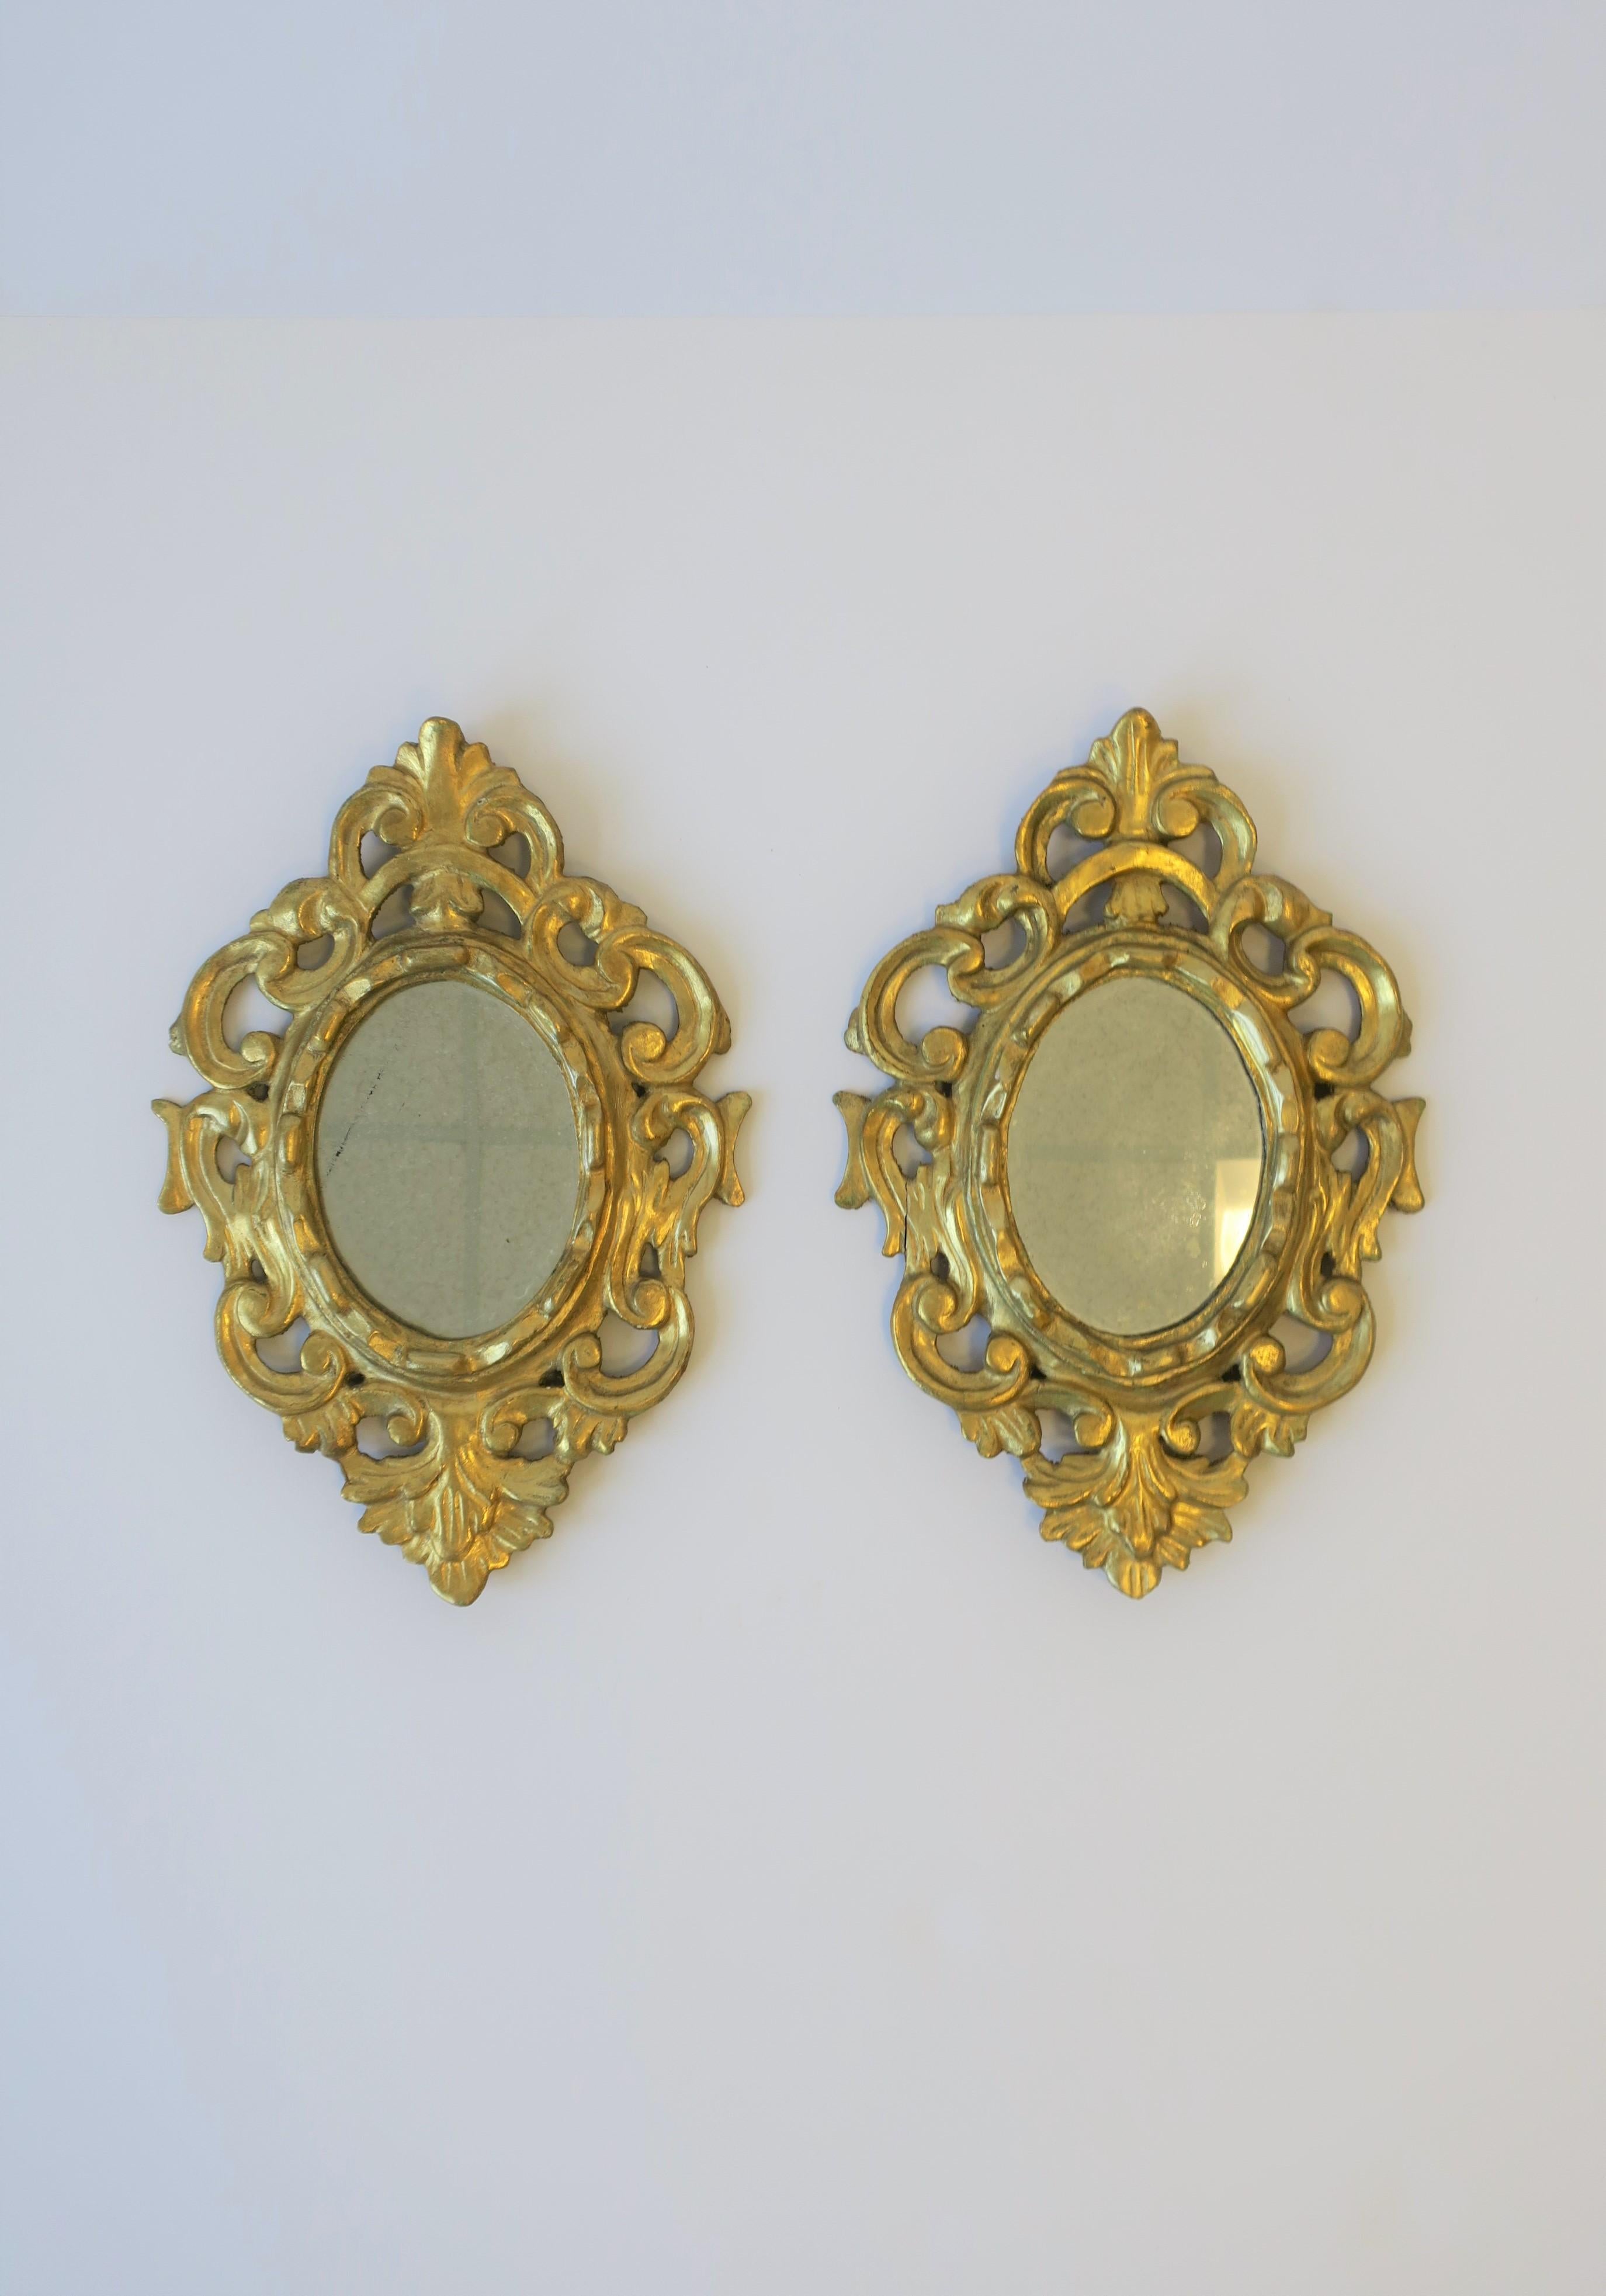 A European oval gold giltwood wall mirror(s) from Spain, circa early to mid-20th century. Each mirror is marked on back 